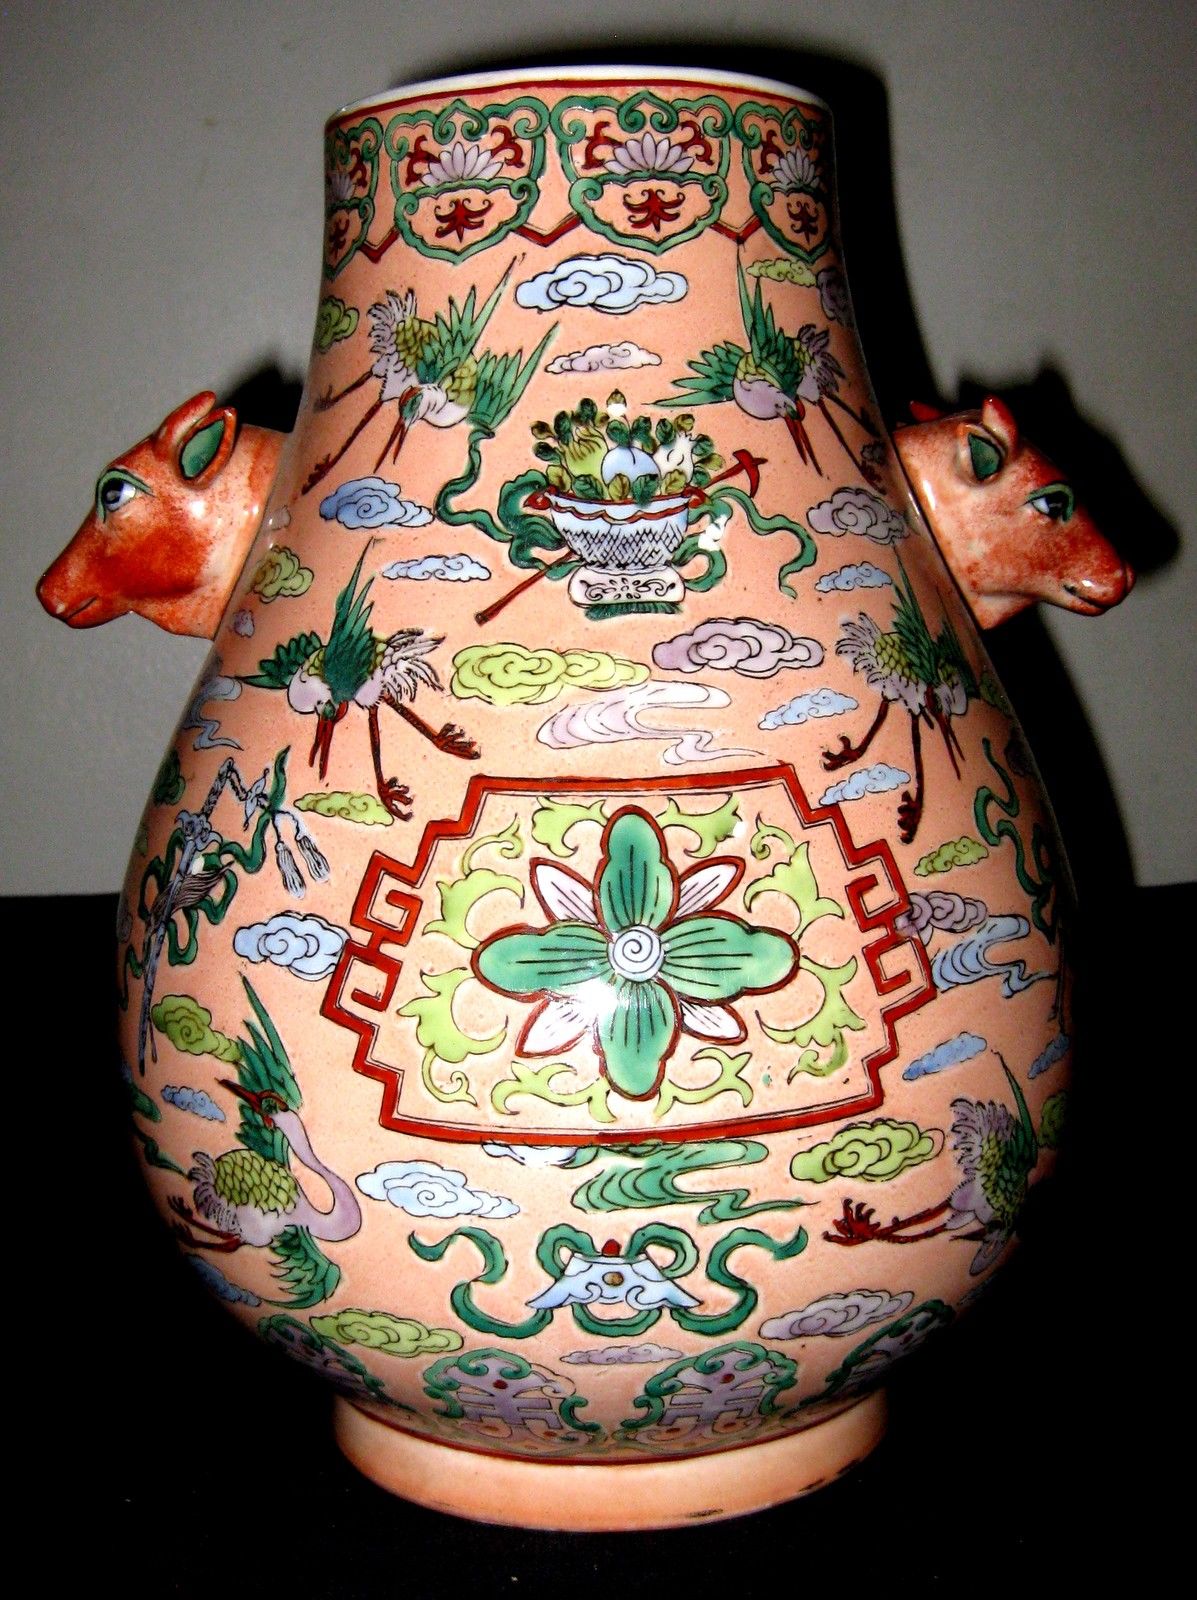 ANTIQUE CHINESE PORCELAIN FLOWER BIRD VASE WITH TWO COW HEADS, 19TH CENTURY